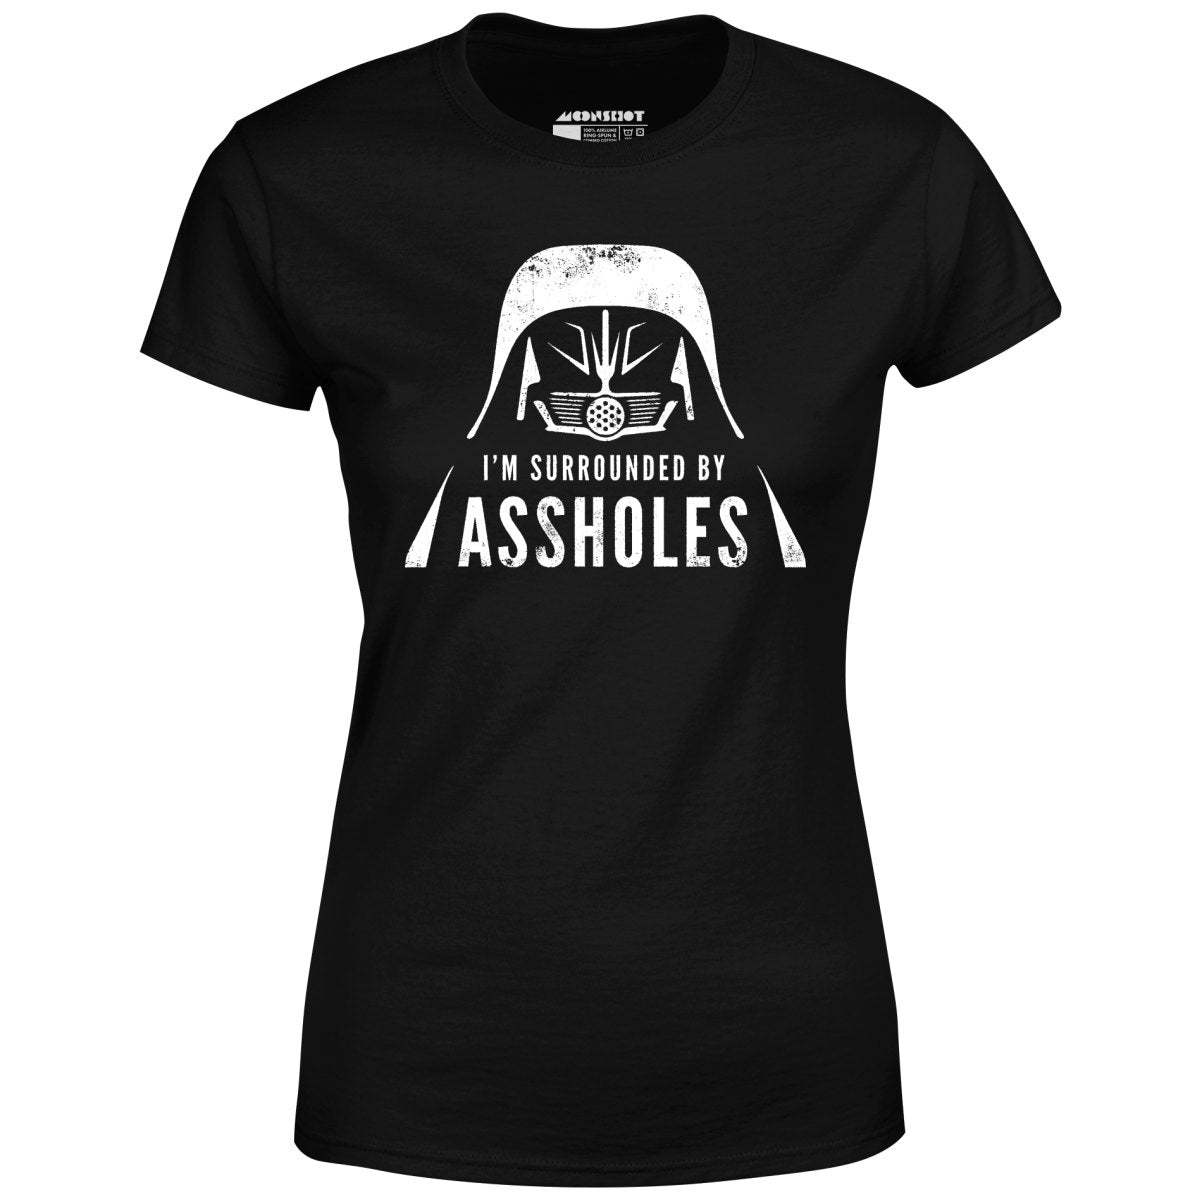 I'm Surrounded By Assholes - Women's T-Shirt